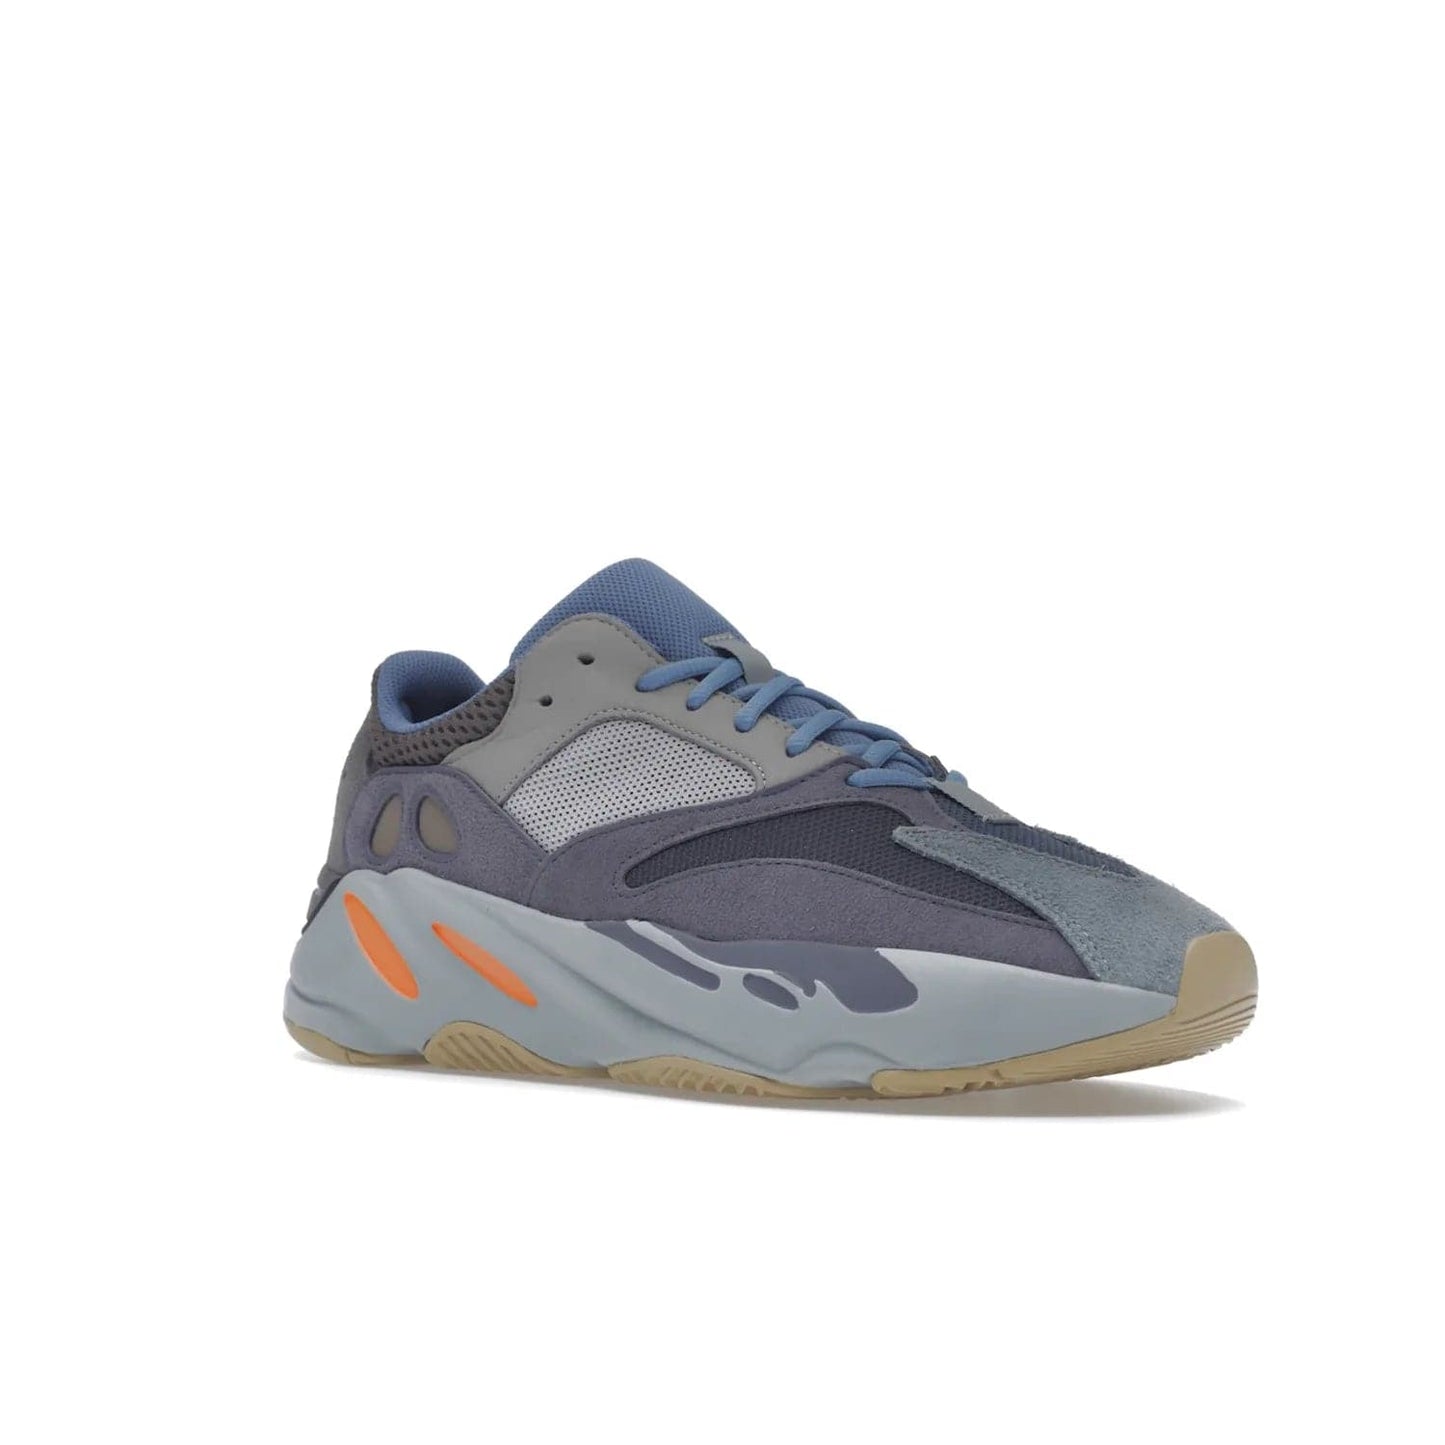 adidas Yeezy Boost 700 Carbon Blue - Image 5 - Only at www.BallersClubKickz.com - Style meets practicality with the adidas Yeezy Boost 700 Carbon Blue. Tonal grey and carbon blue mix of suede and mesh upper, grey midsole and gum outsole. Get yours today.